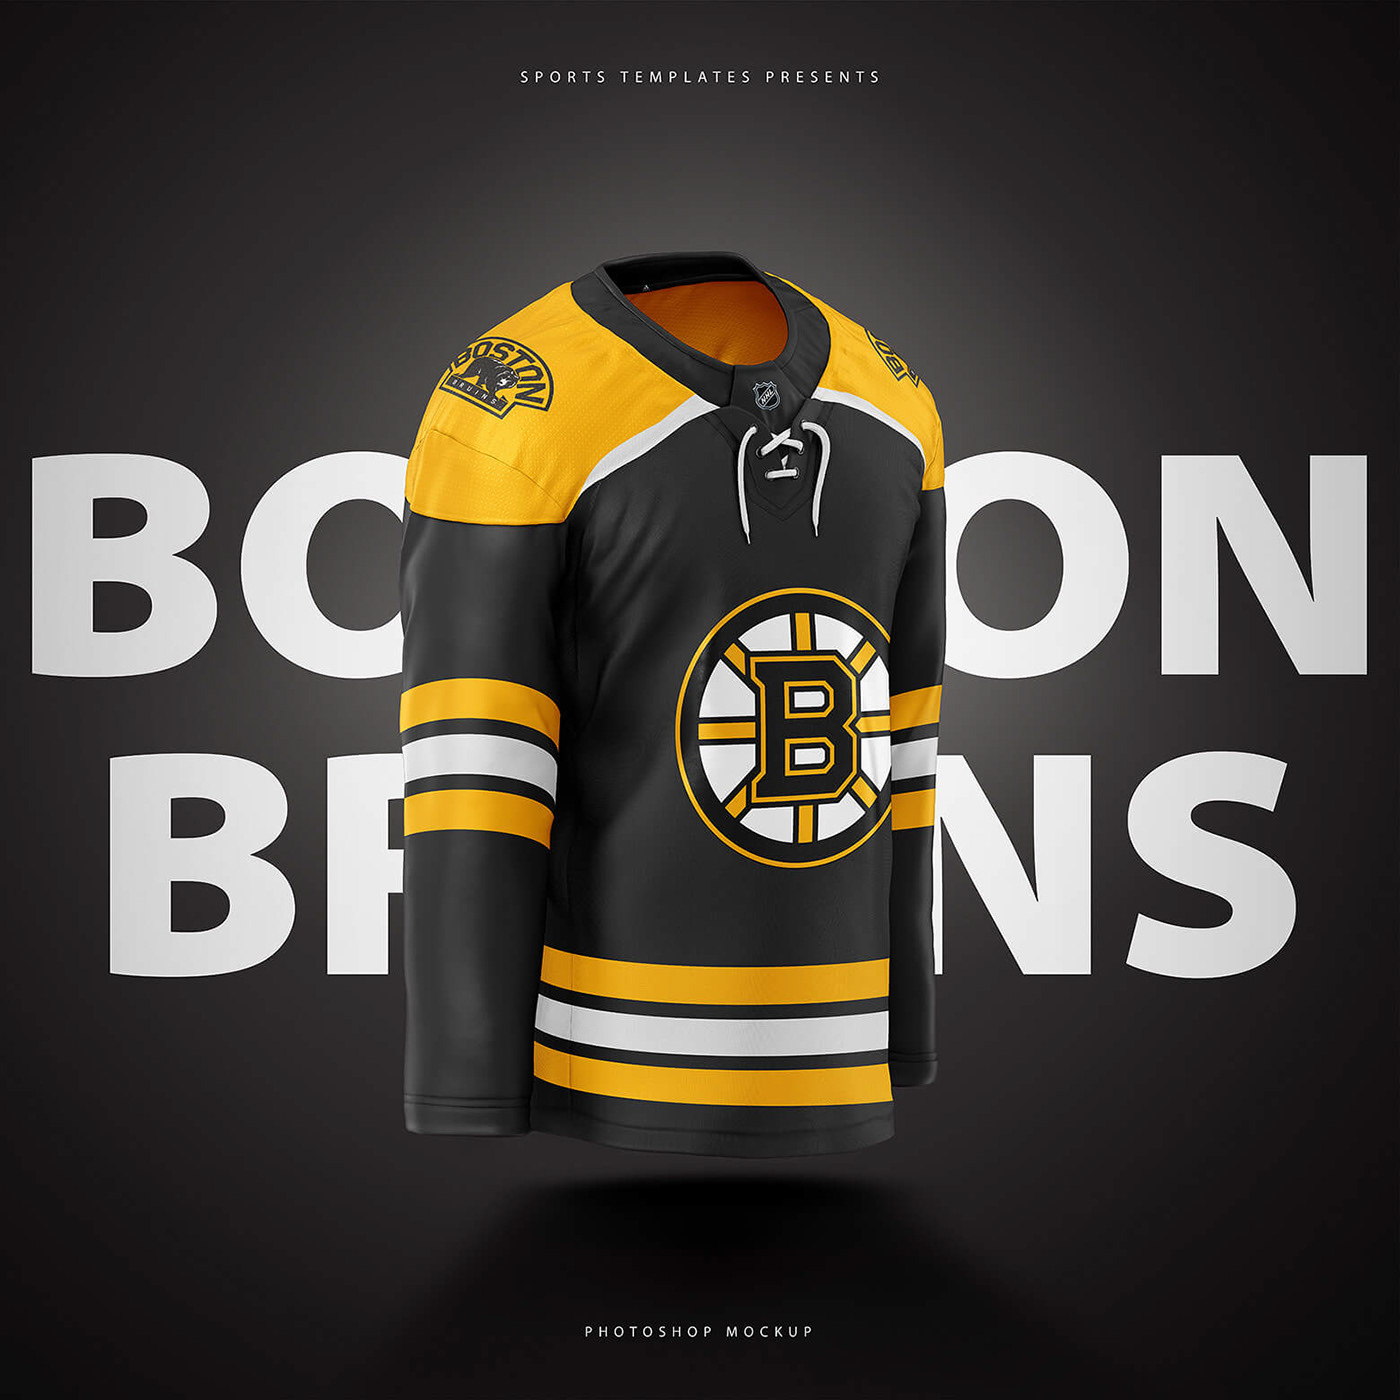 NHL Jerseys with Ads Mock-Ups: Western Conference Edition : r/hockey